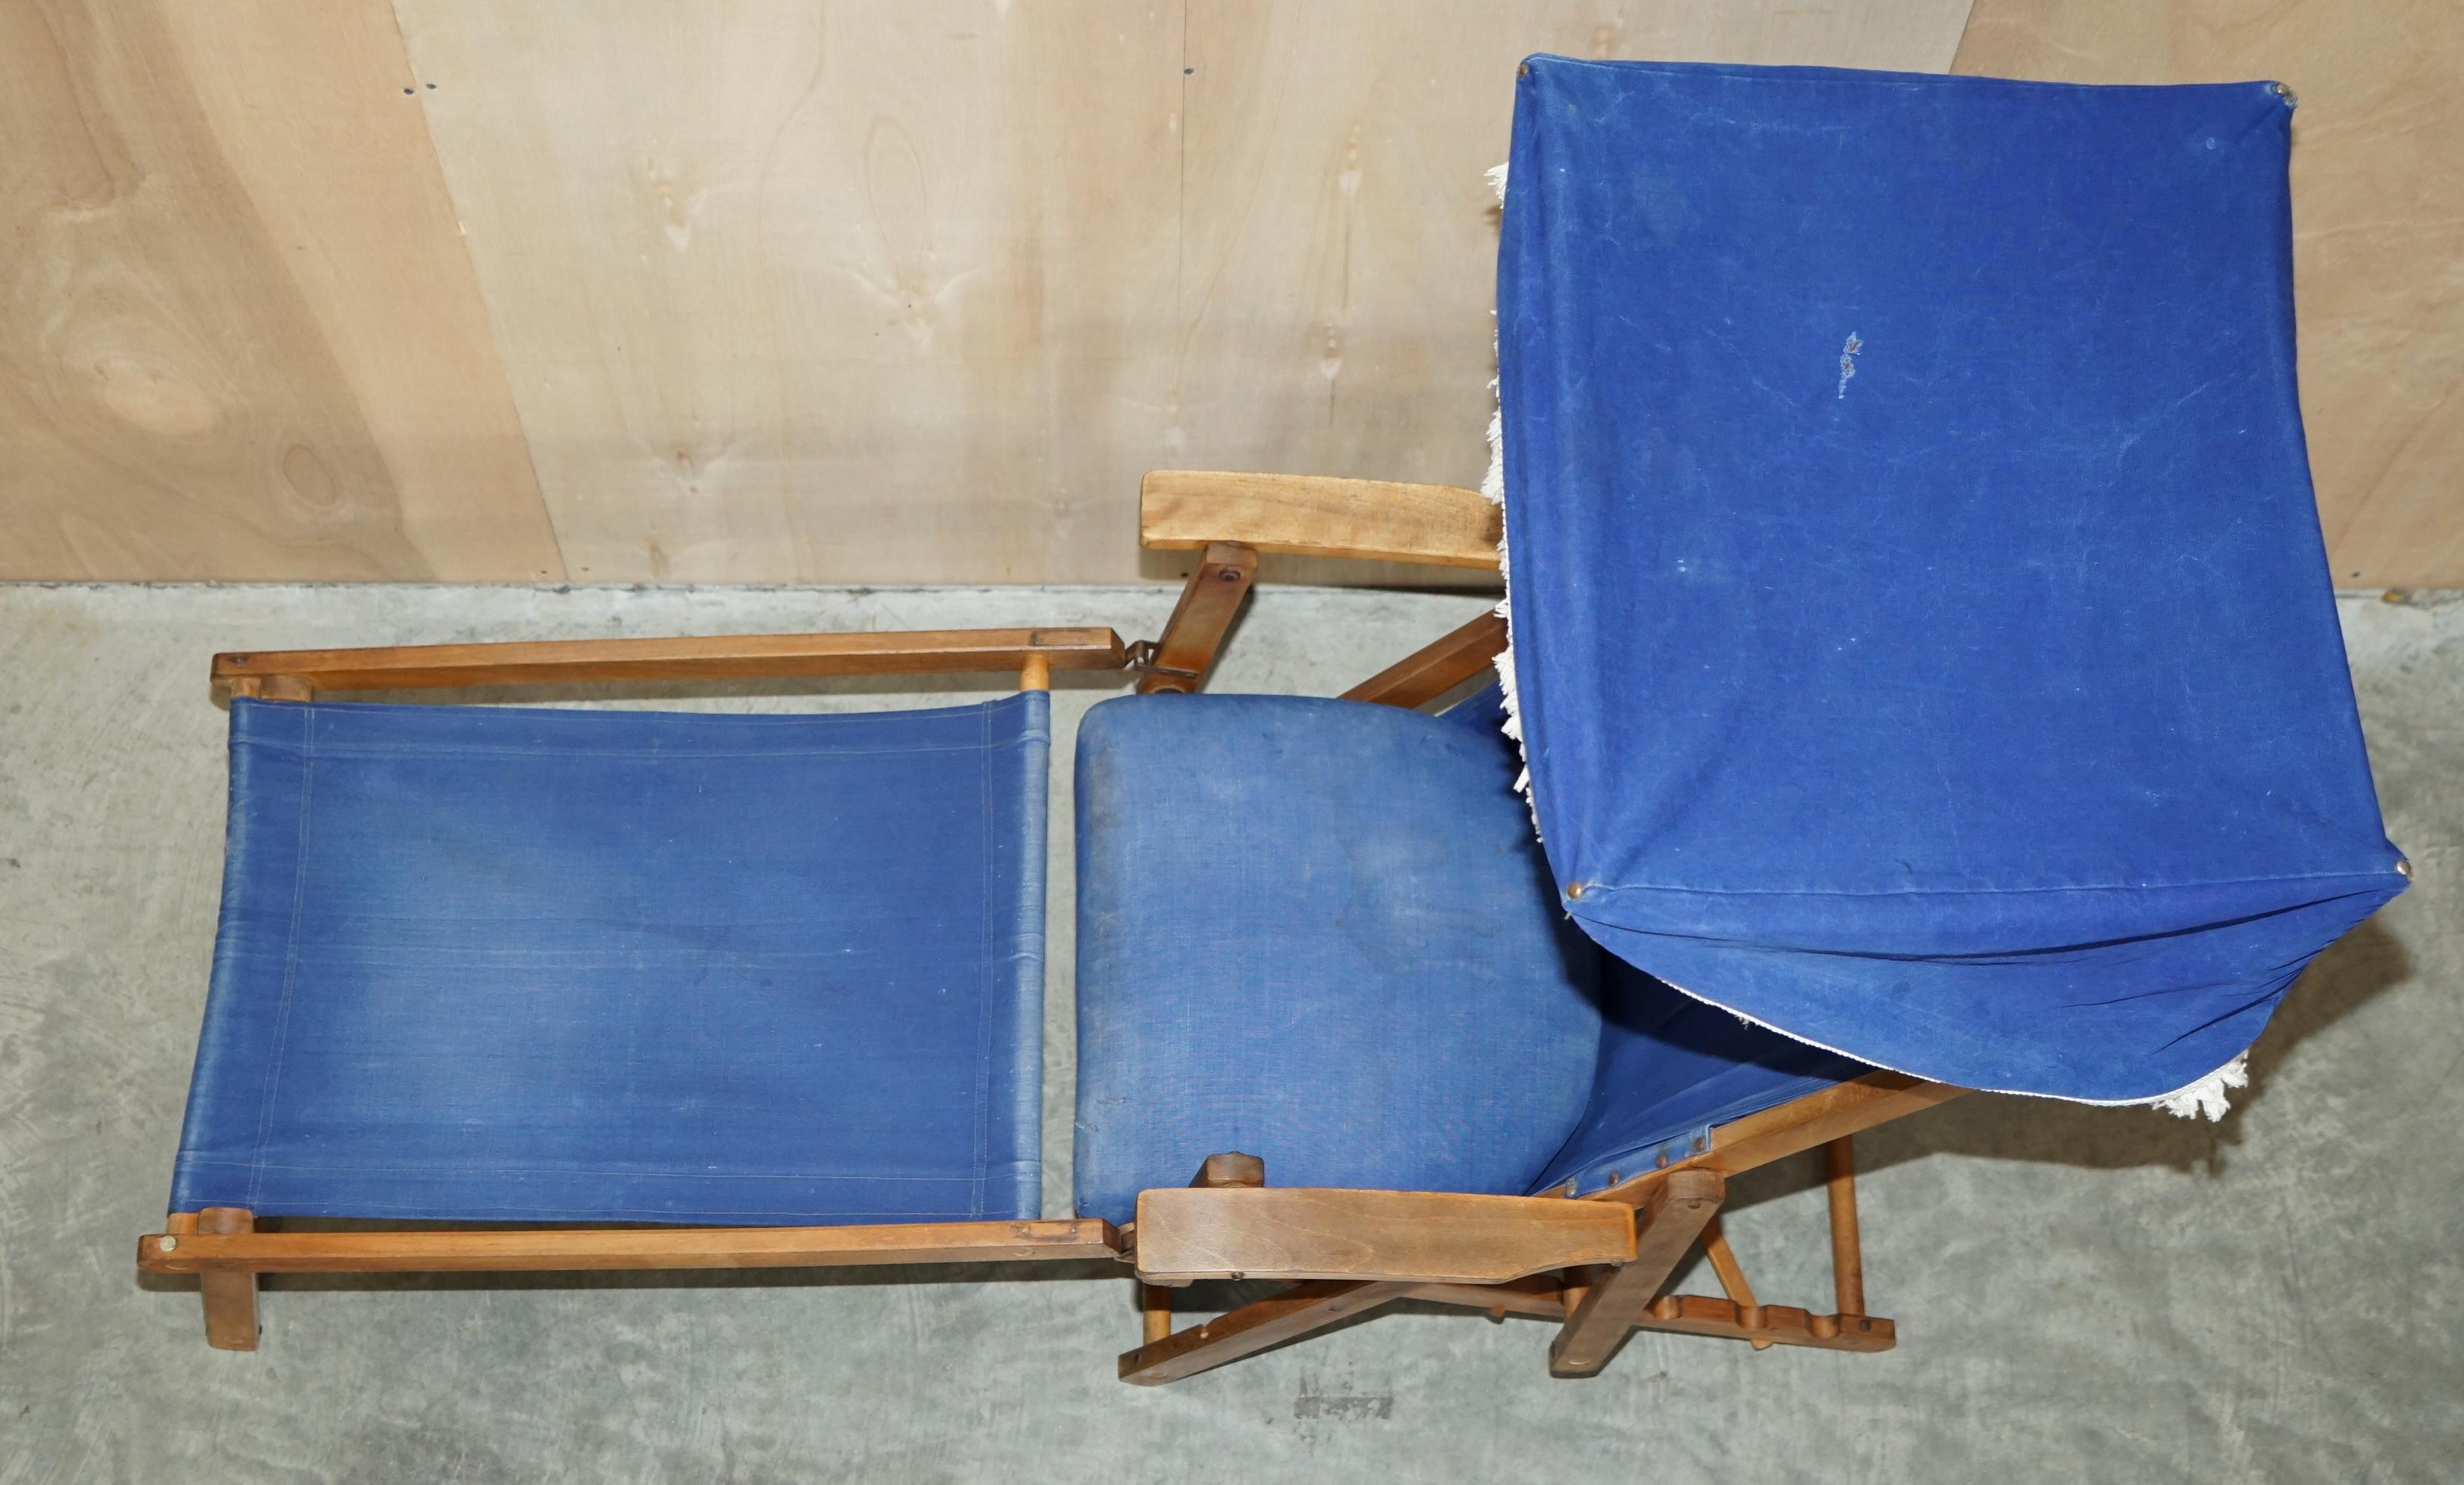 Pair of Antique circa 1900 Haxyes Steamer Deck Chairs Canopy Top & Footrests For Sale 1